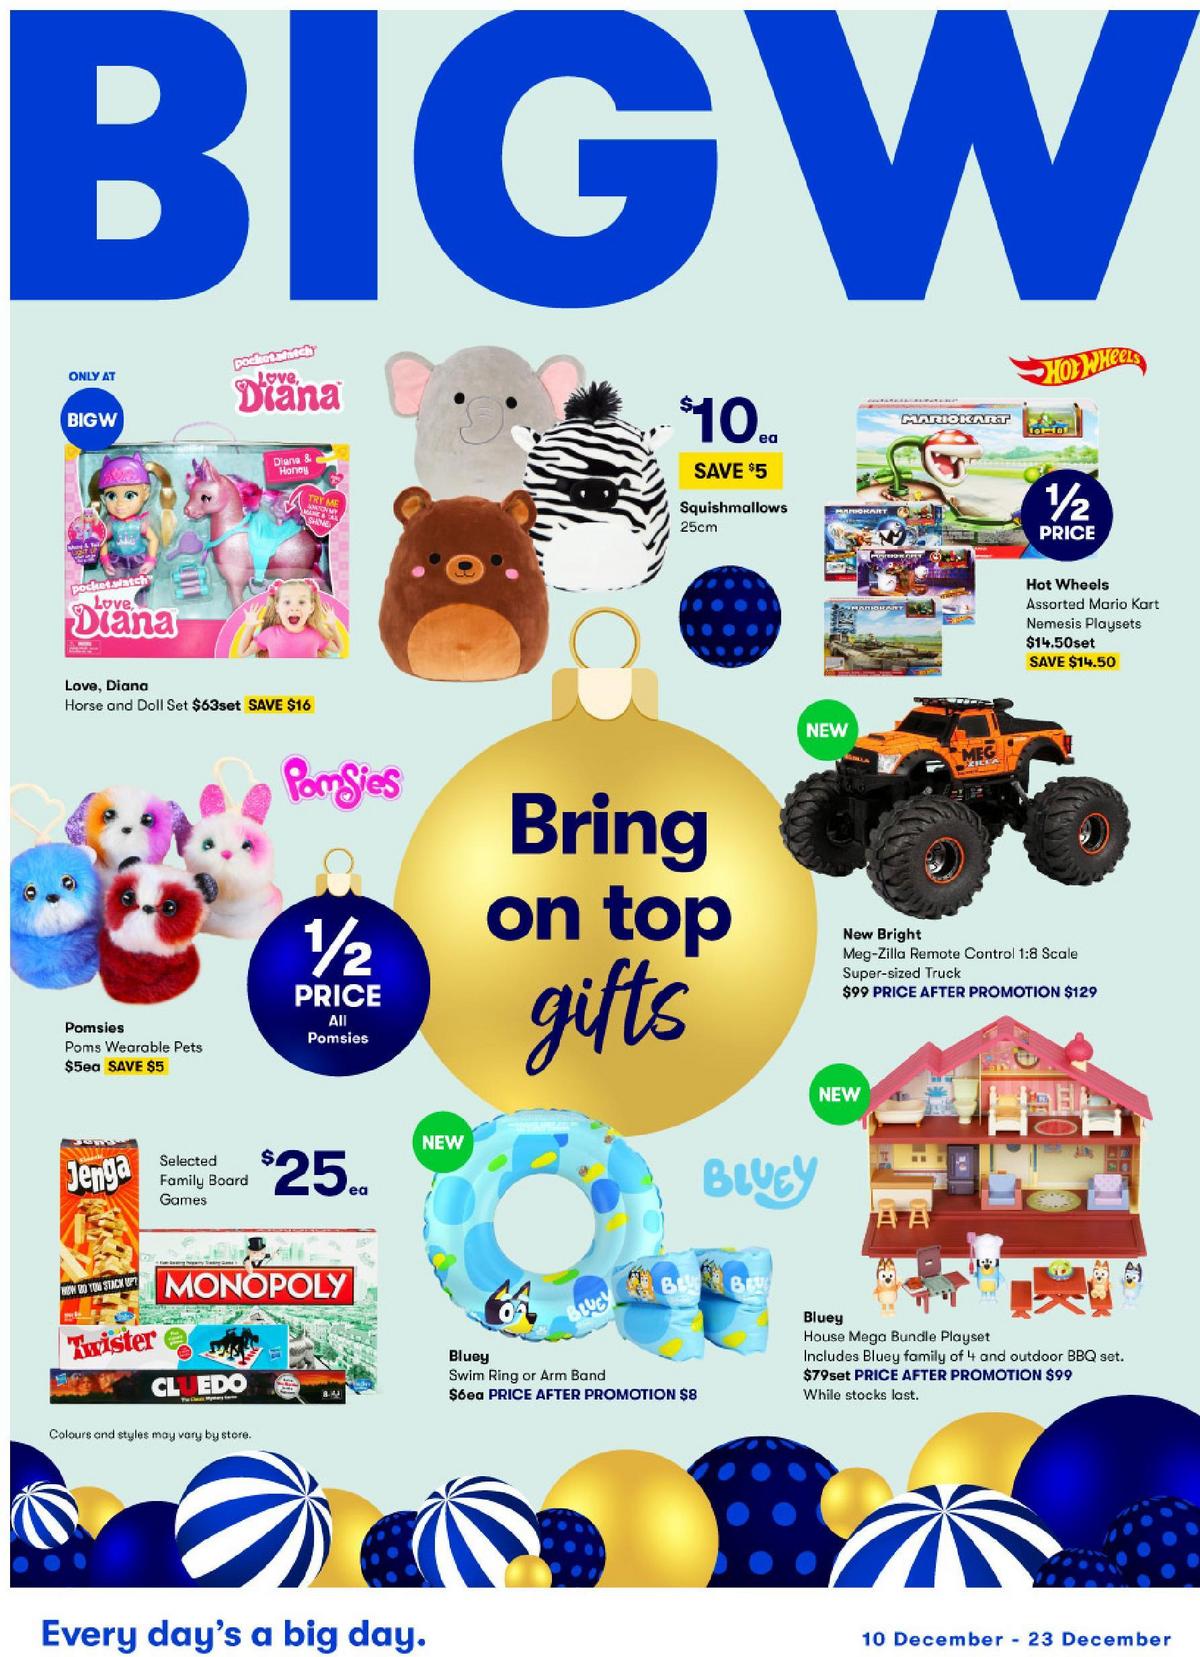 Big W Bring on Top Gifts Catalogues from 10 December